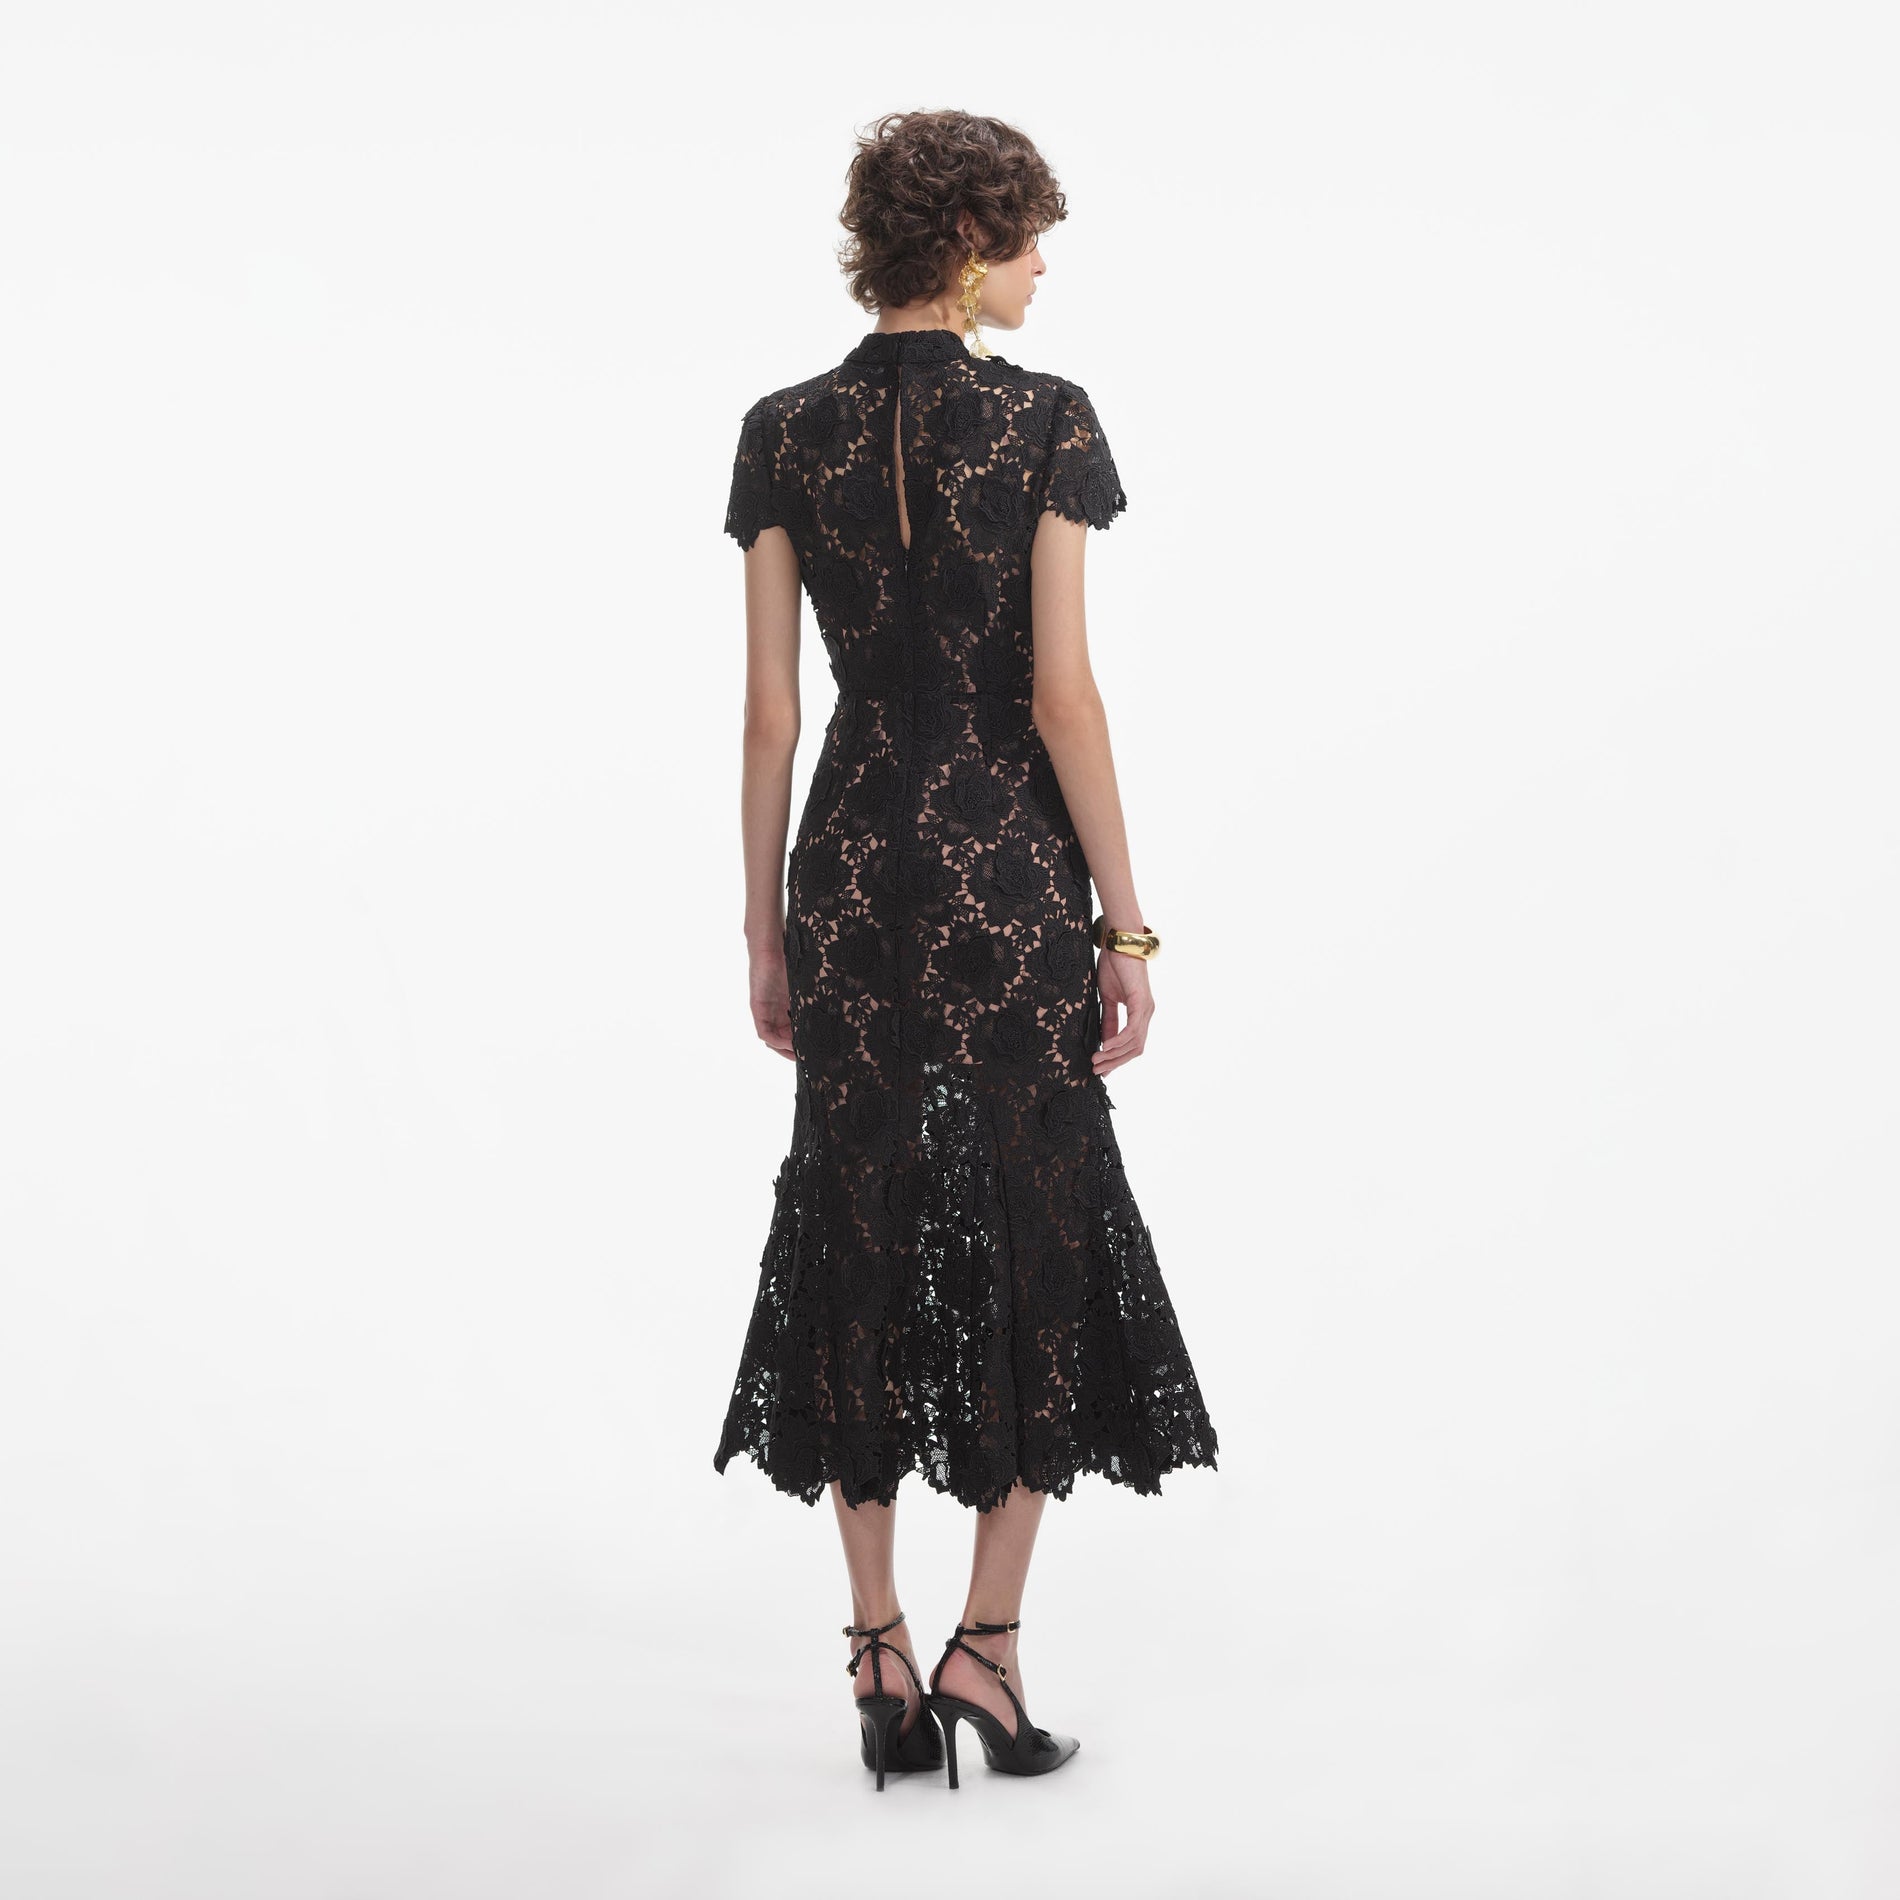 Back view of a woman wearing the White Black Flower Lace Midi Dress